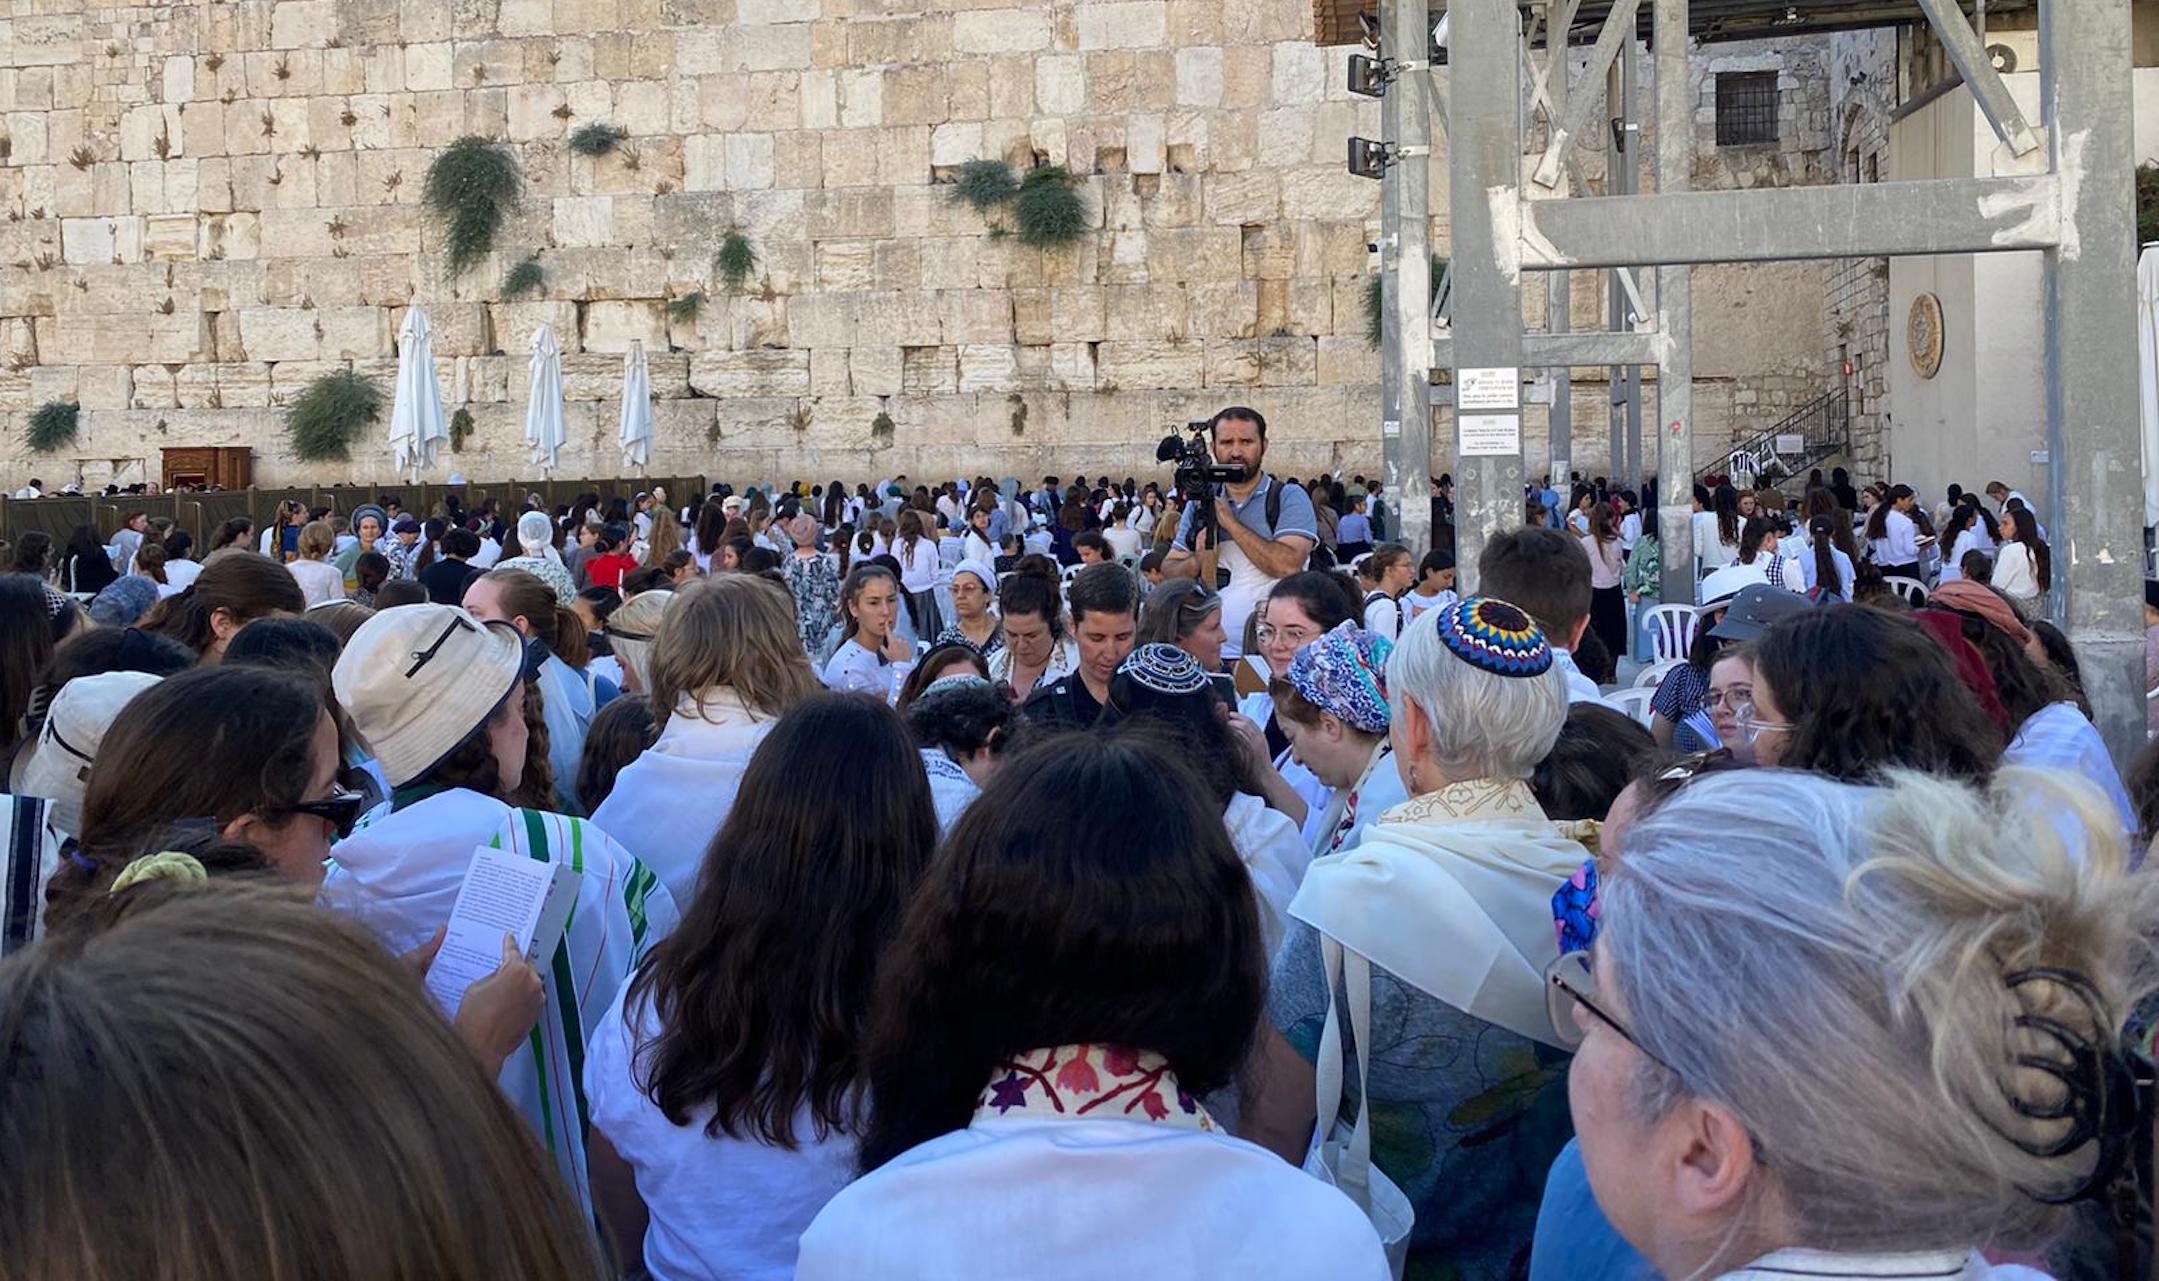 Thousands of protesters gathered around non-Orthodox women, including a bat mitzvah girl and her family, at the Western Wall, July 29, 2022.